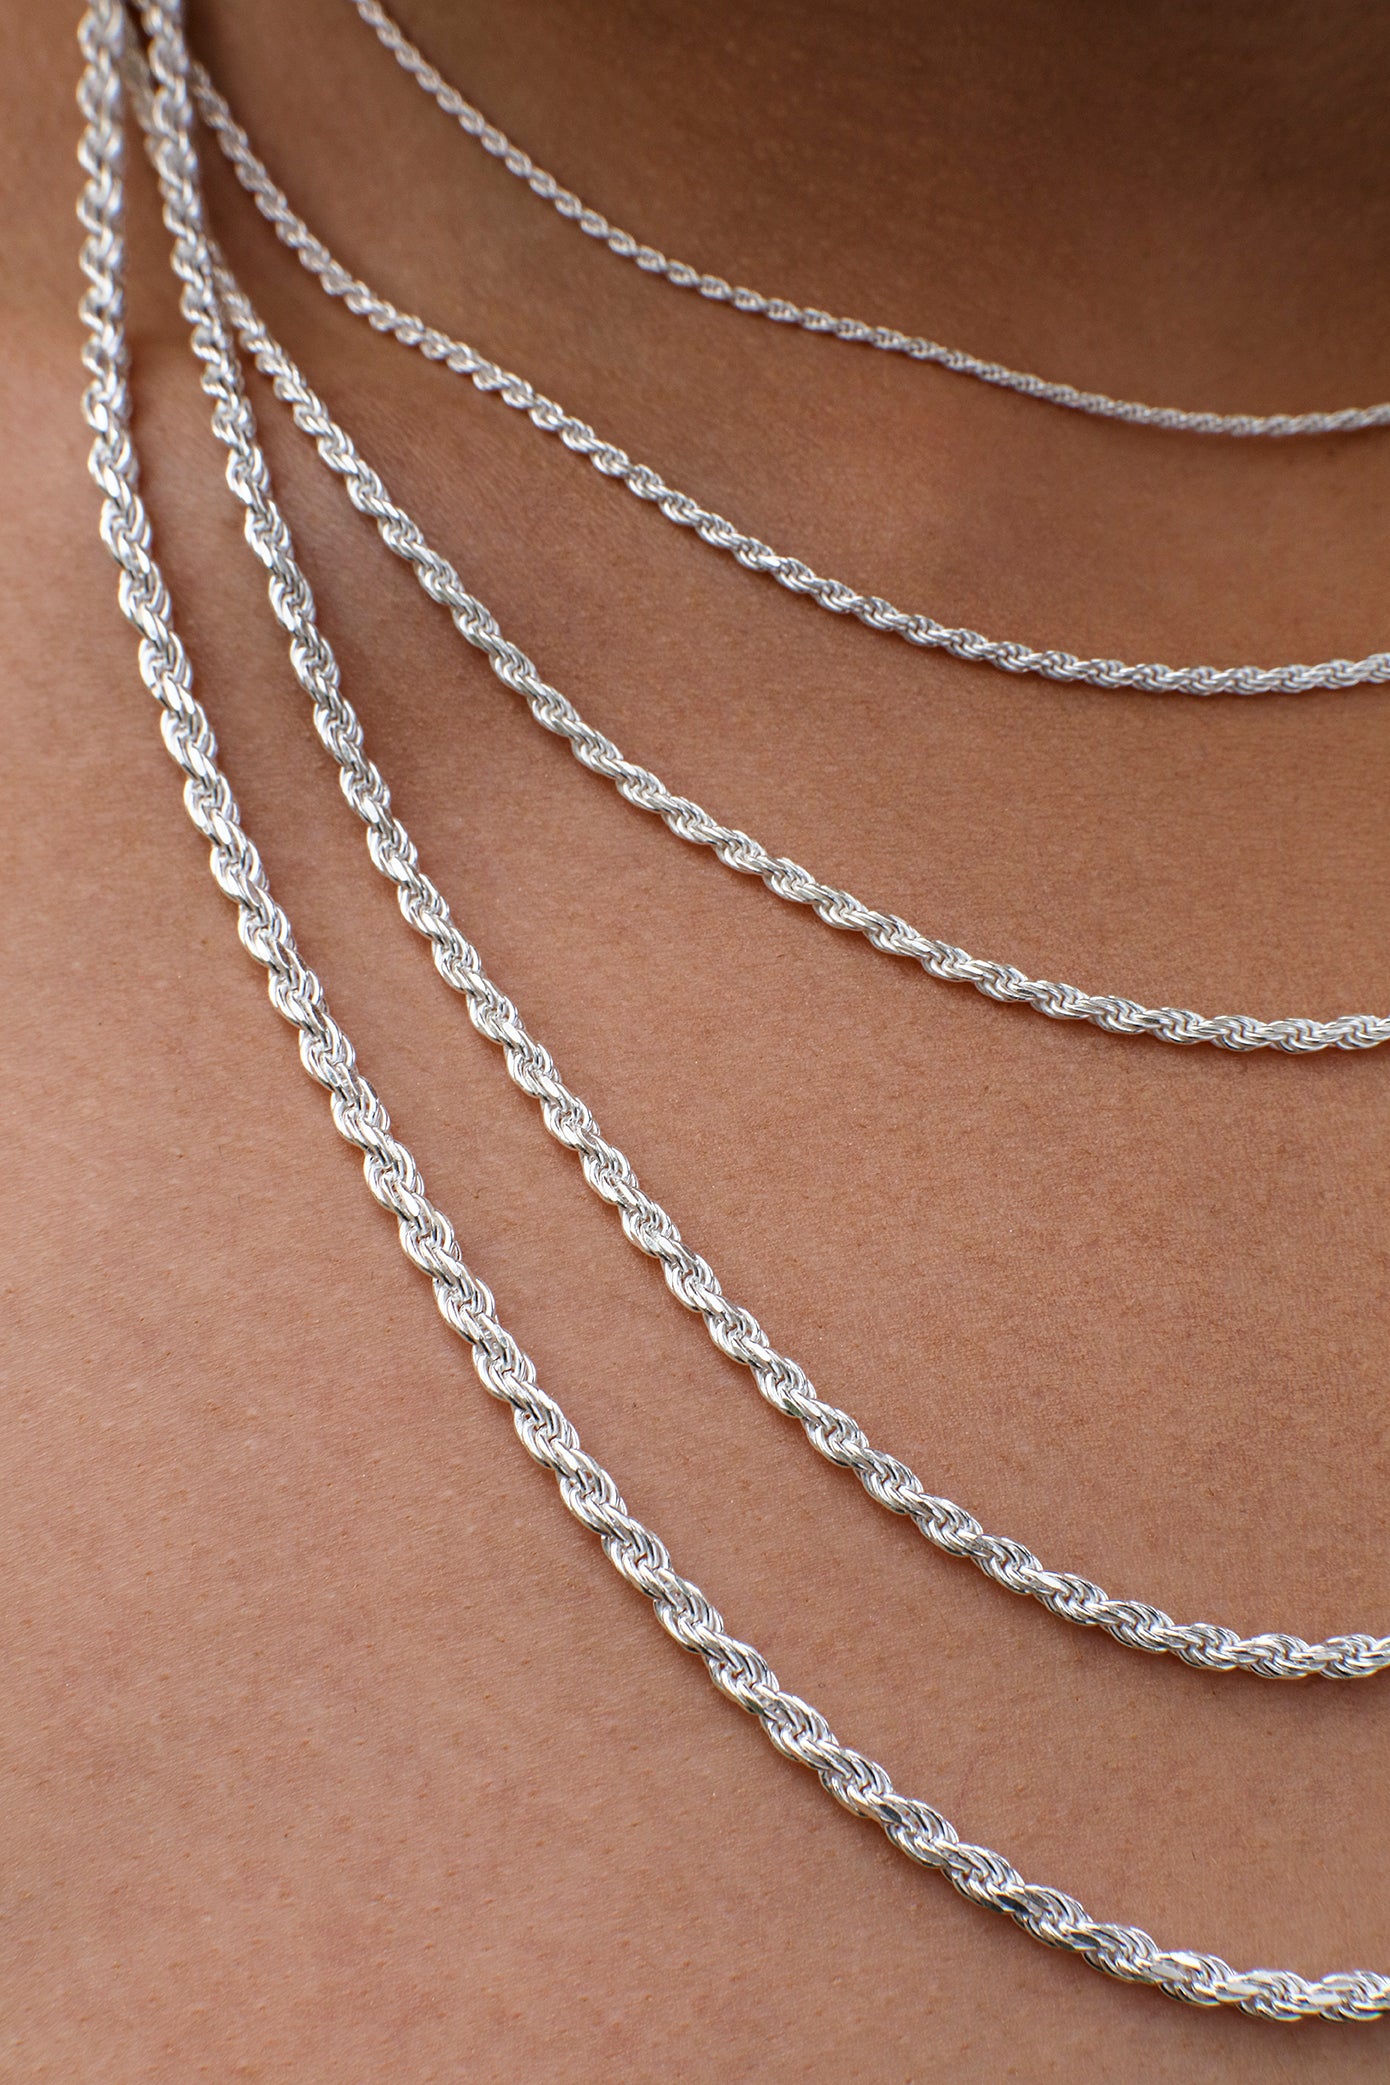 925 Sterling Silver Rope Chain 1.5MM 16-36 Inch